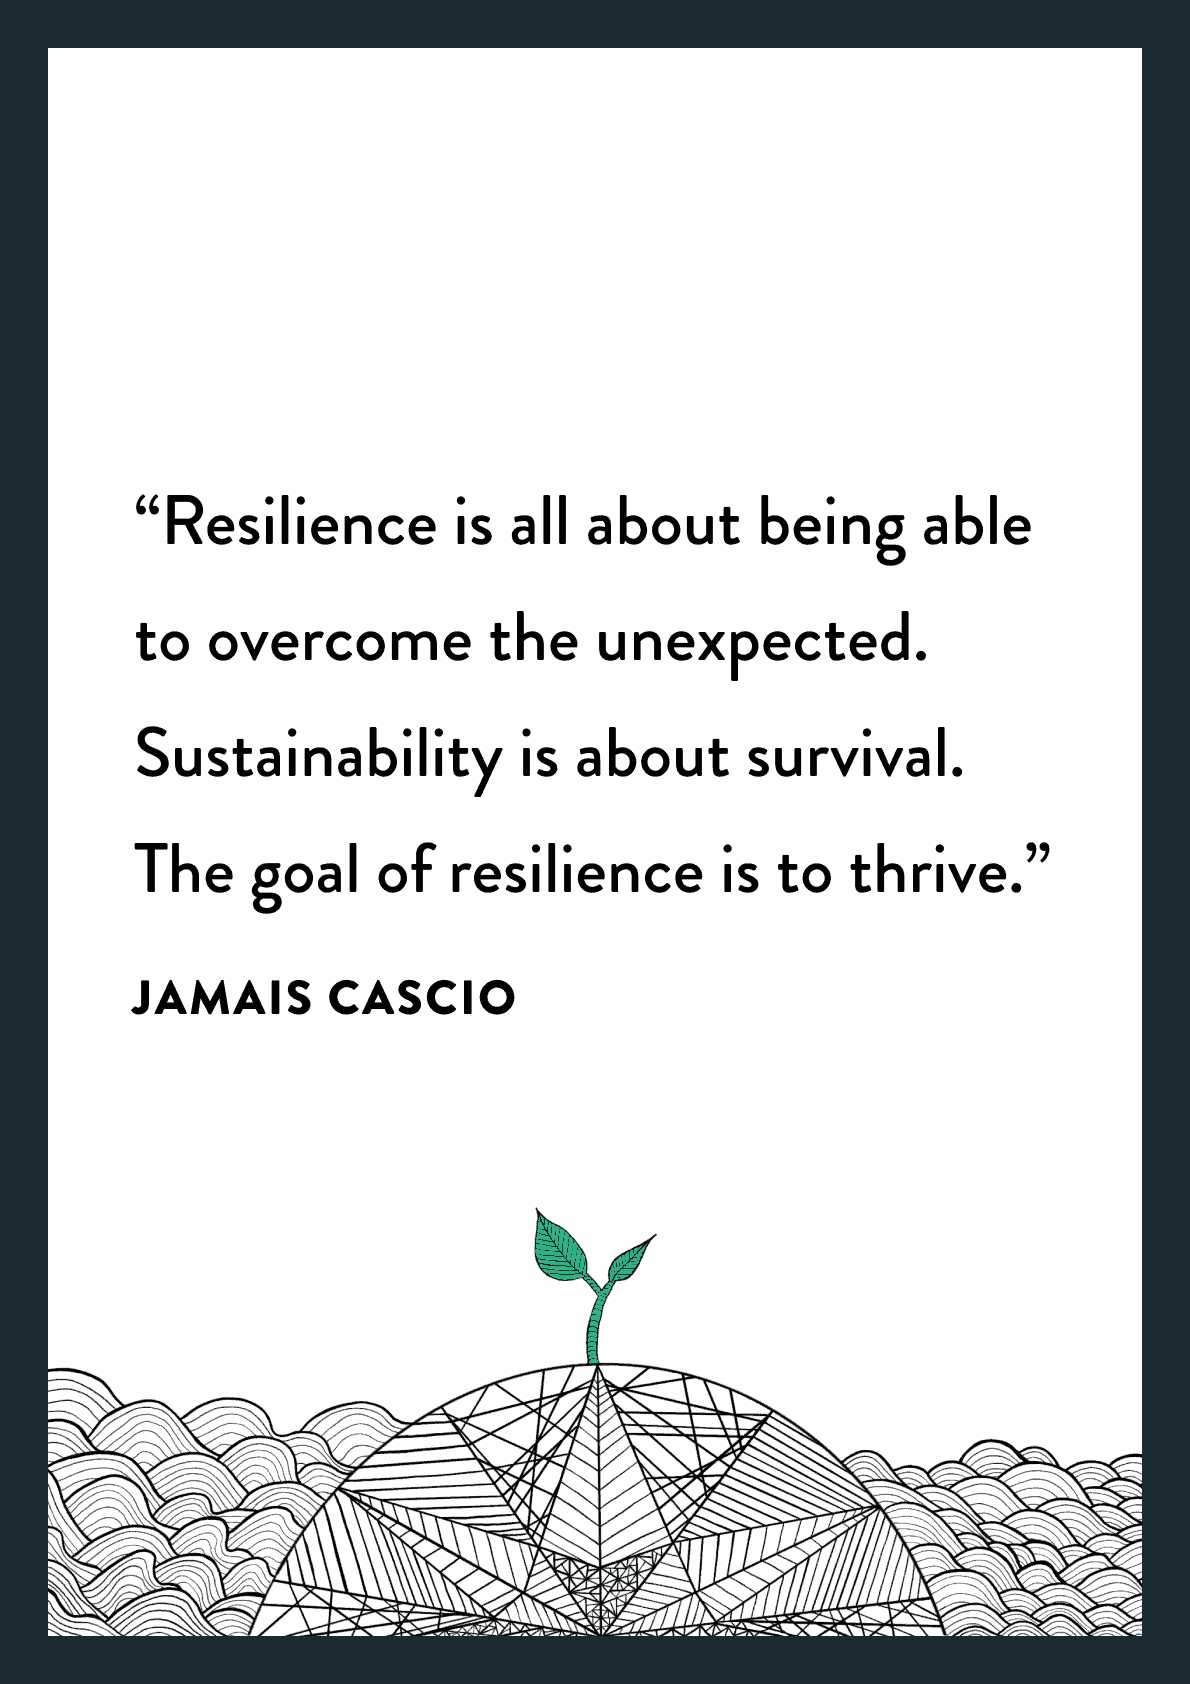 The sea and land with a plant growing. With quote "resilience is all about being able to overcome the unexpected. Sustainability as about survival. The goal of resilience is to thrive." Jamais Cascio